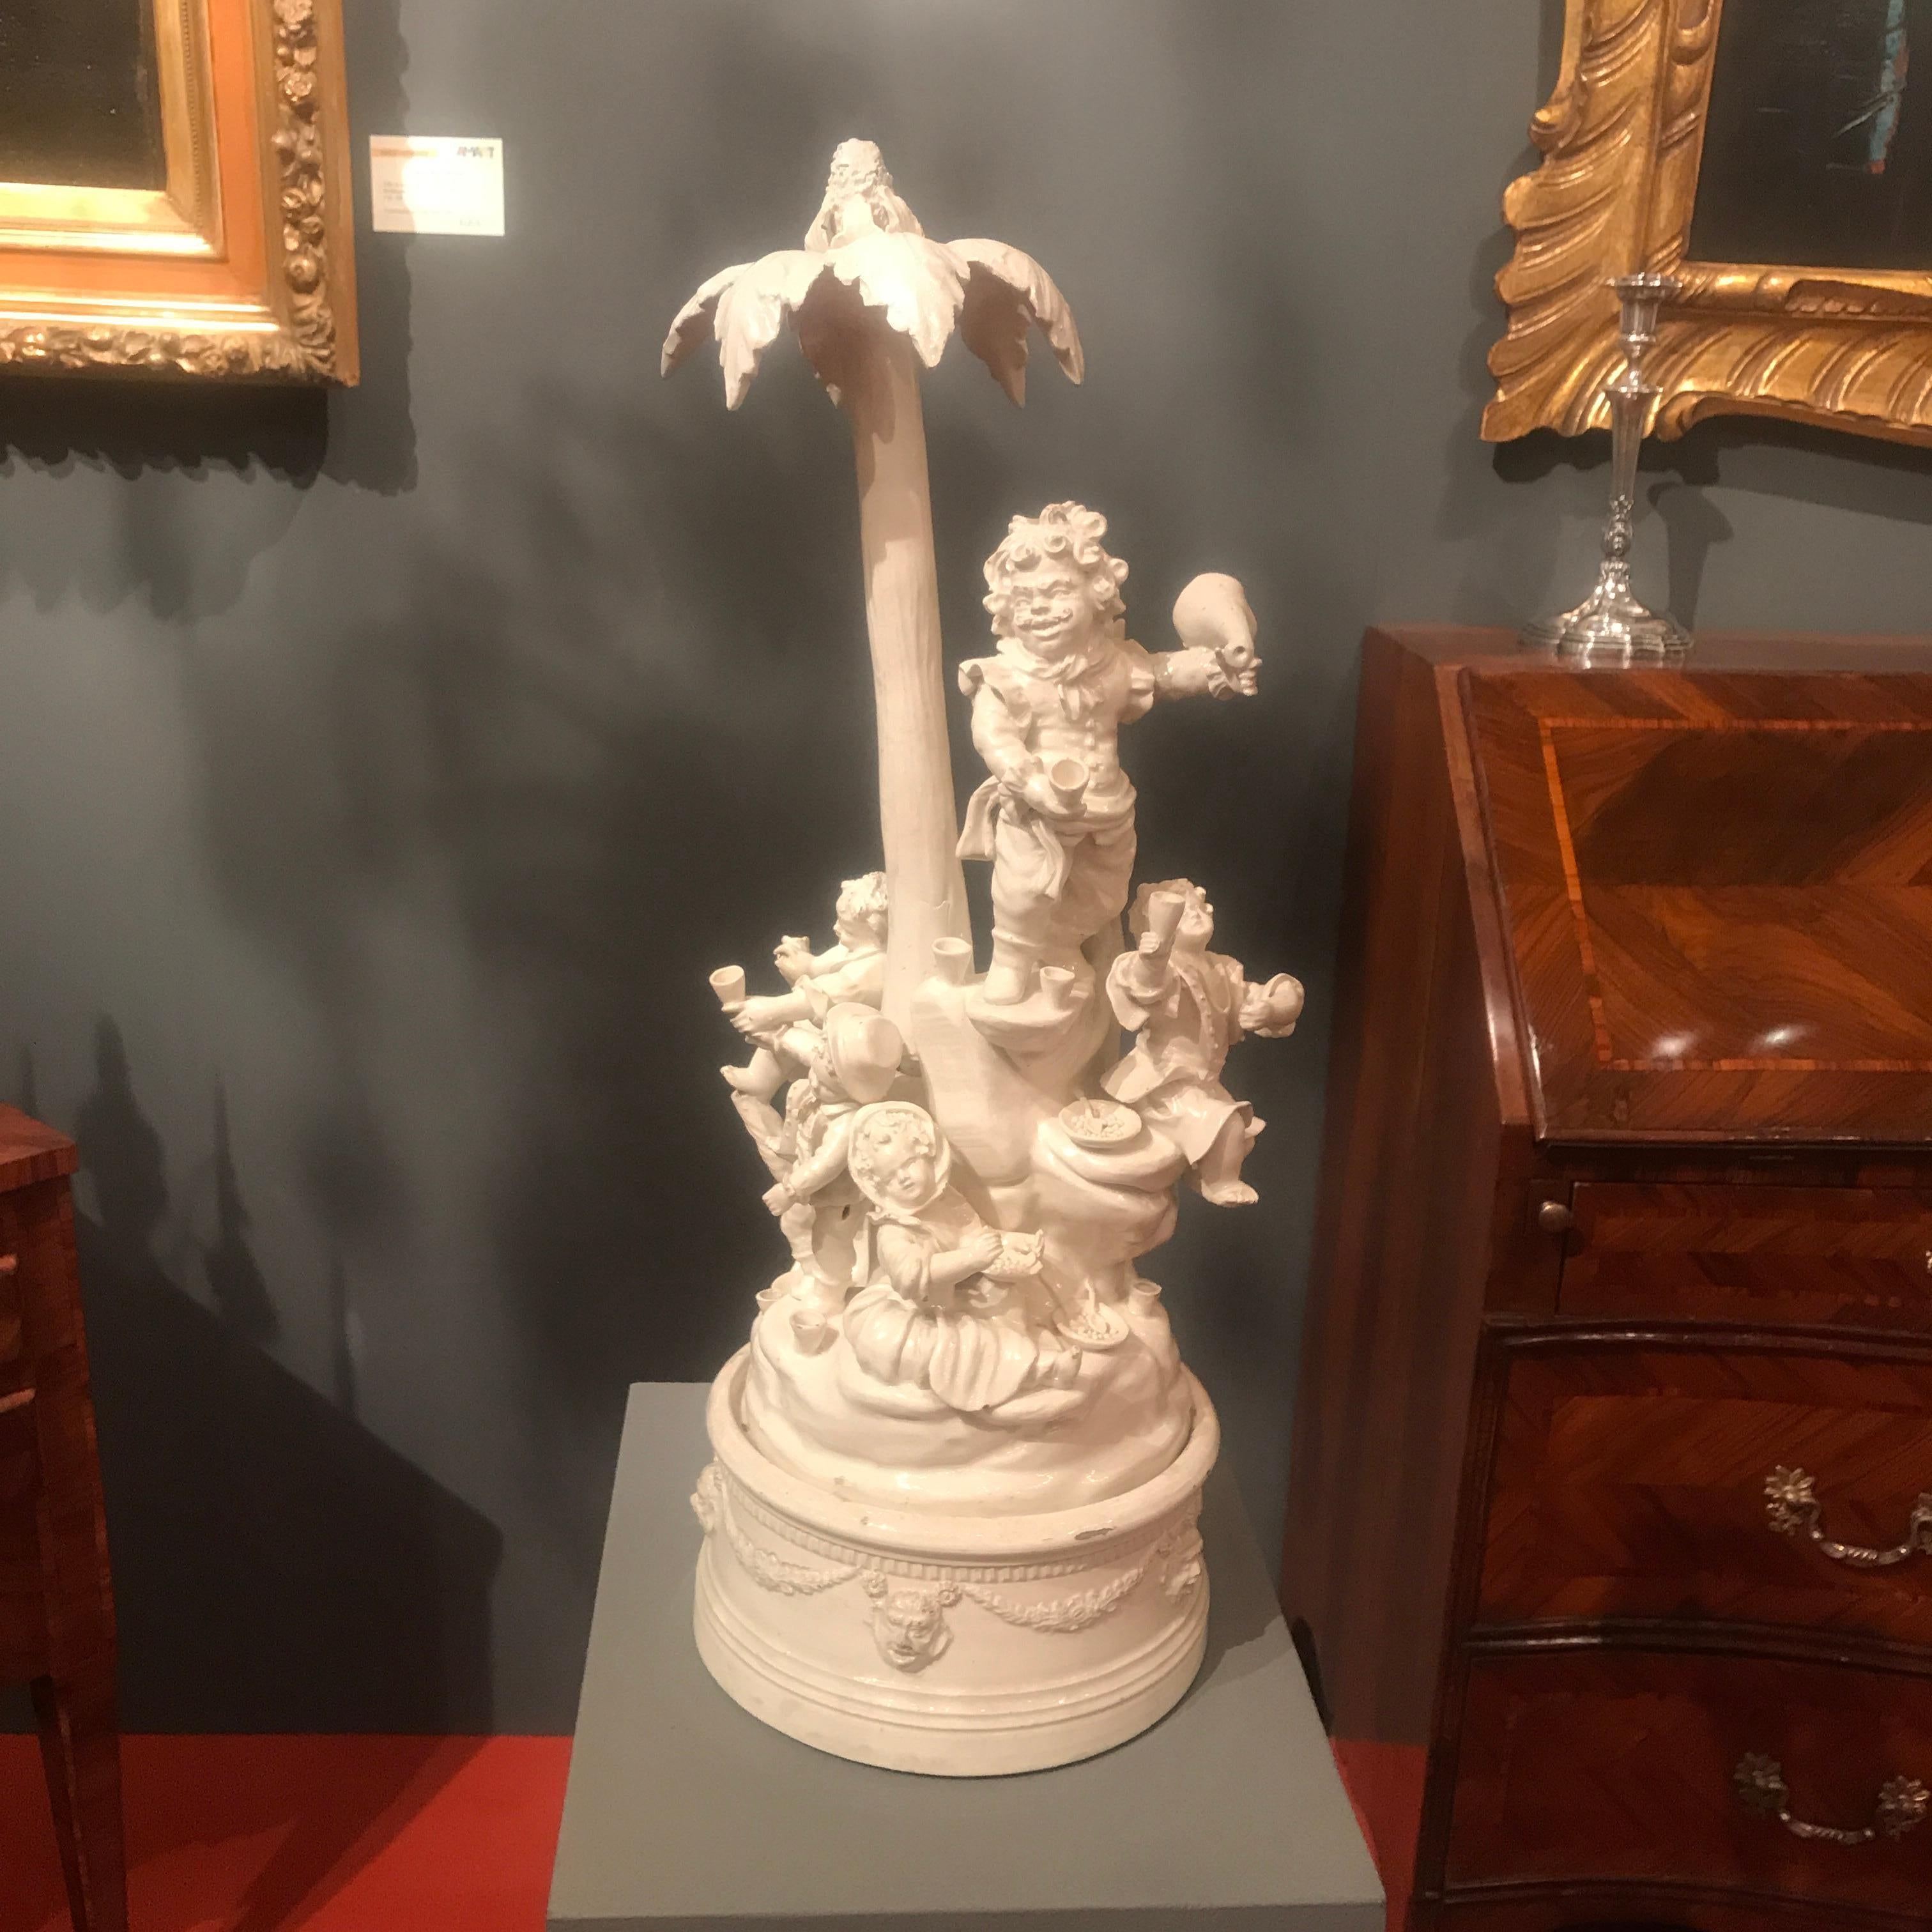 A charming and very decorative Italian white ceramic figurative circular centerpiece depicting a group of dwarfs around a palm tree, in a toasting festive attitude. This Italian antique ceramic work, dates back to the early 19th century, soft-paste